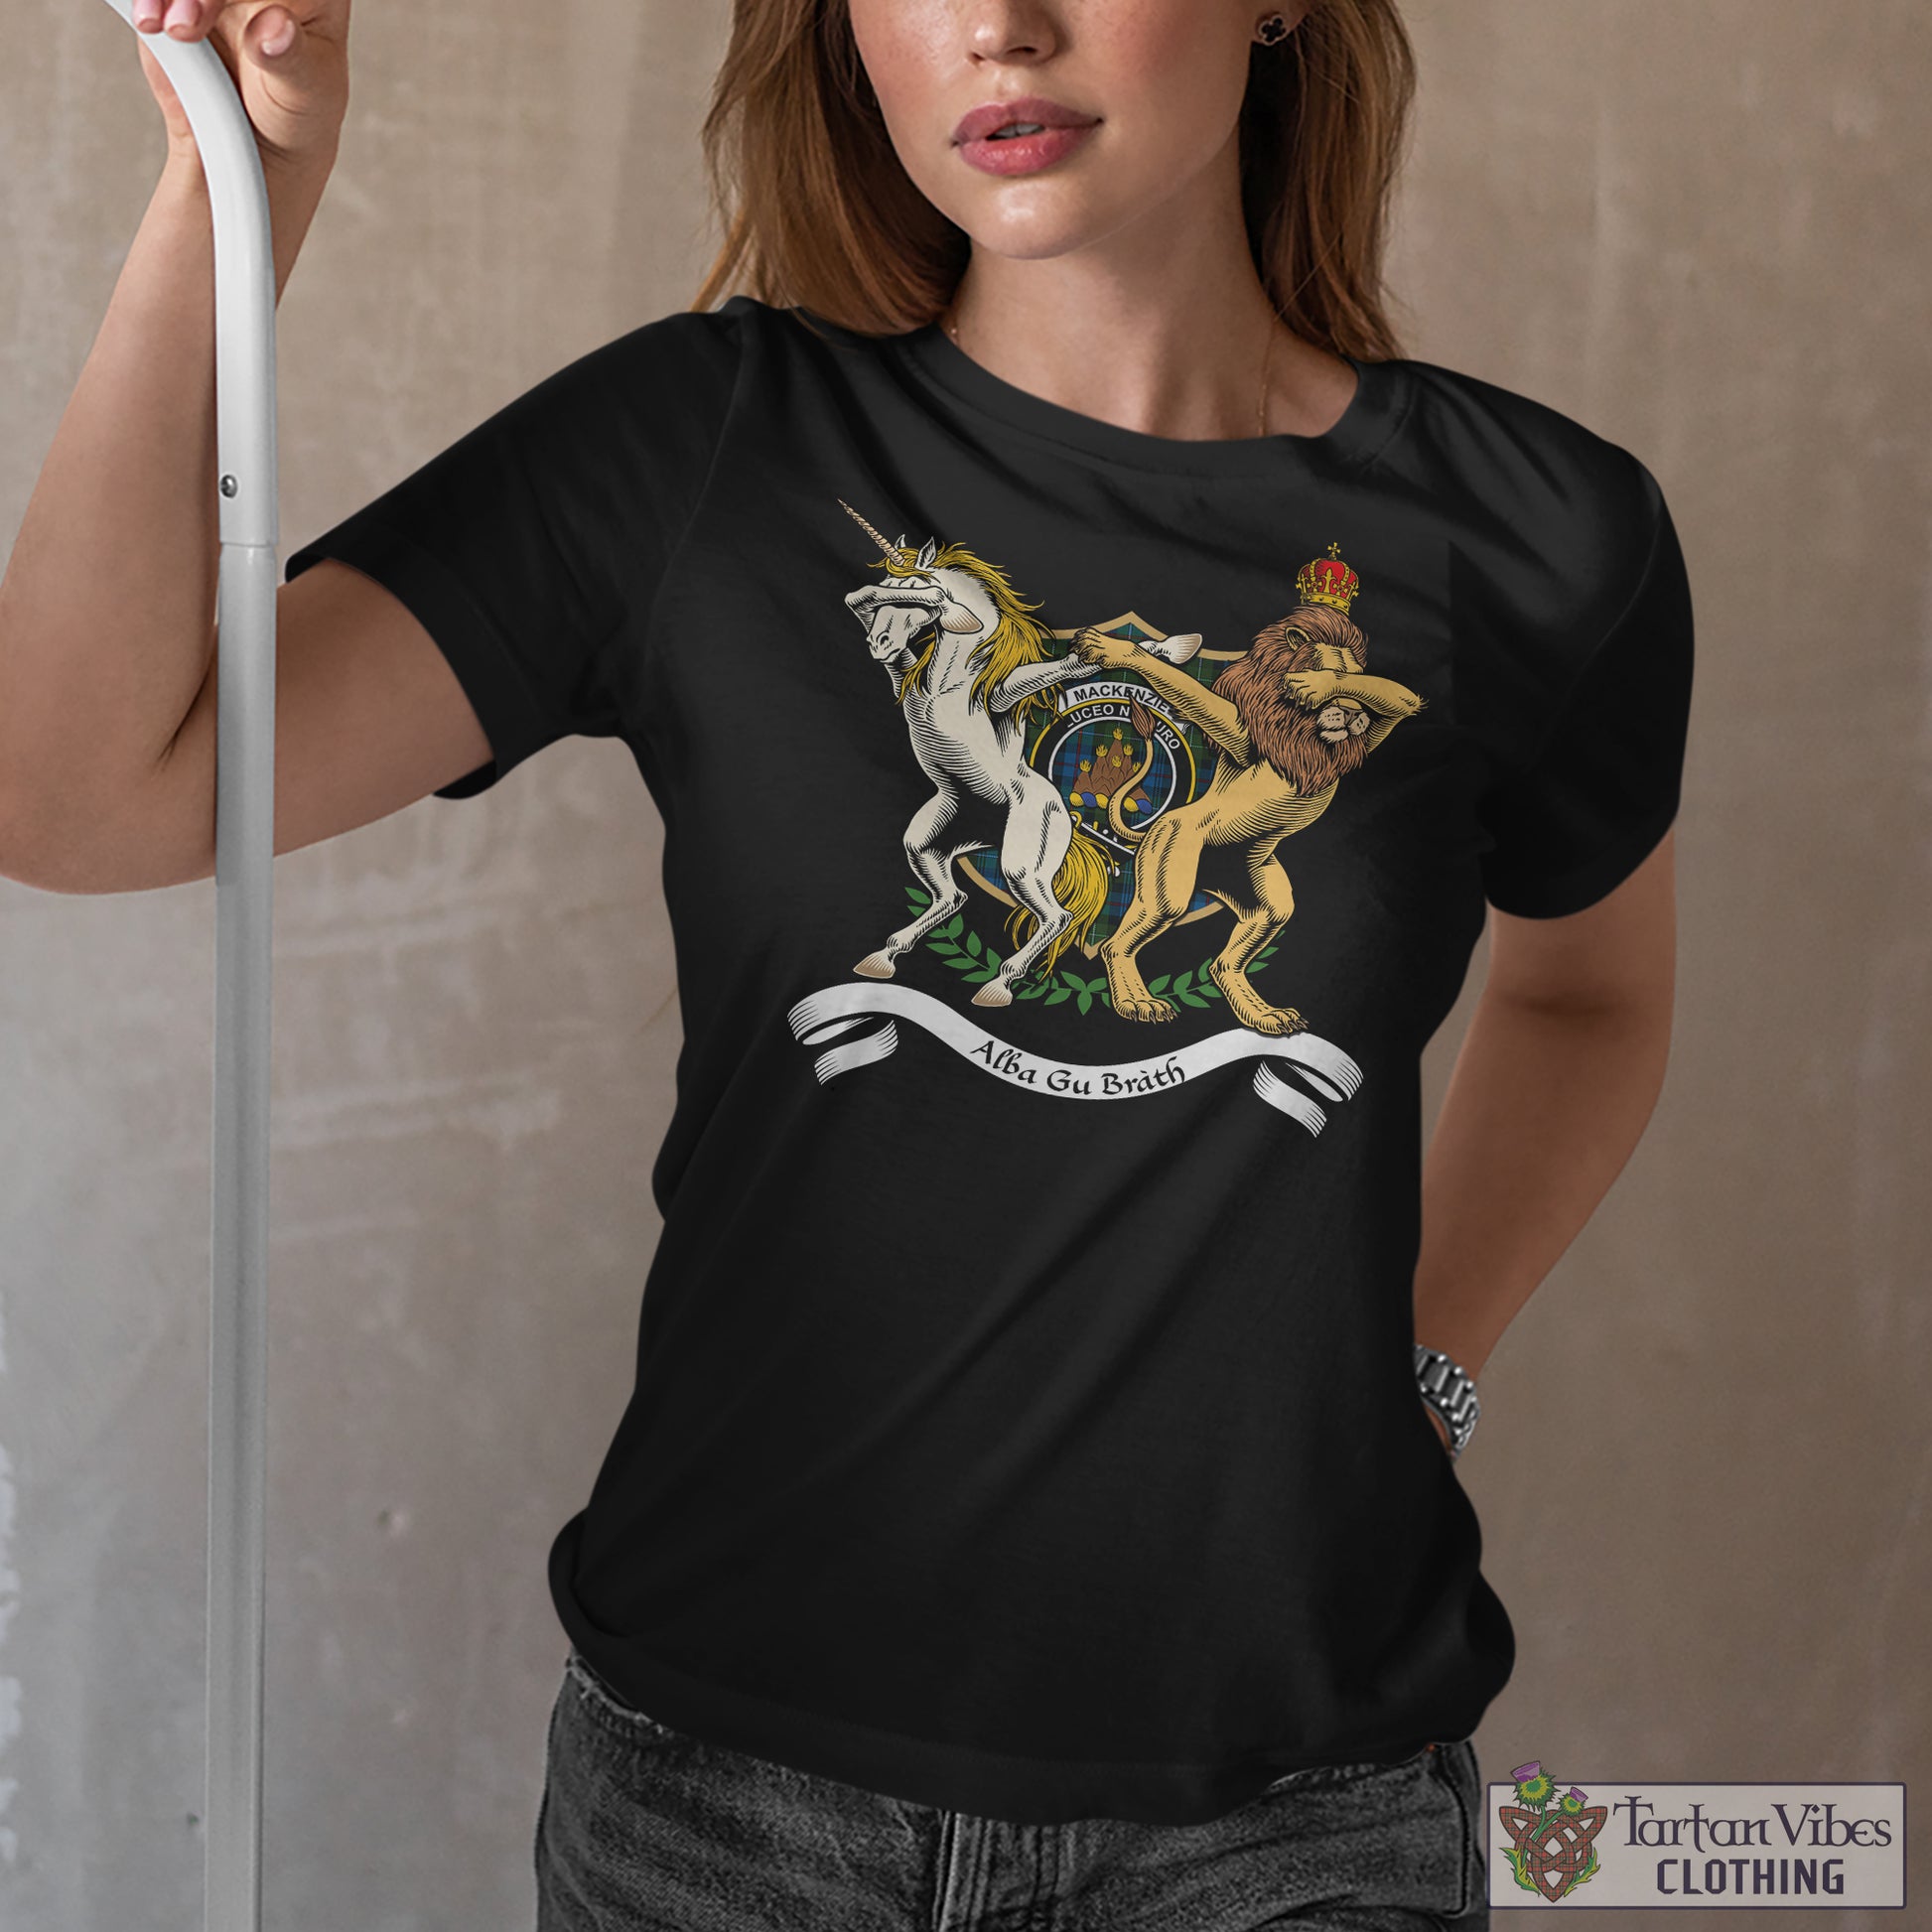 Tartan Vibes Clothing MacKenzie Family Crest Cotton Women's T-Shirt with Scotland Royal Coat Of Arm Funny Style